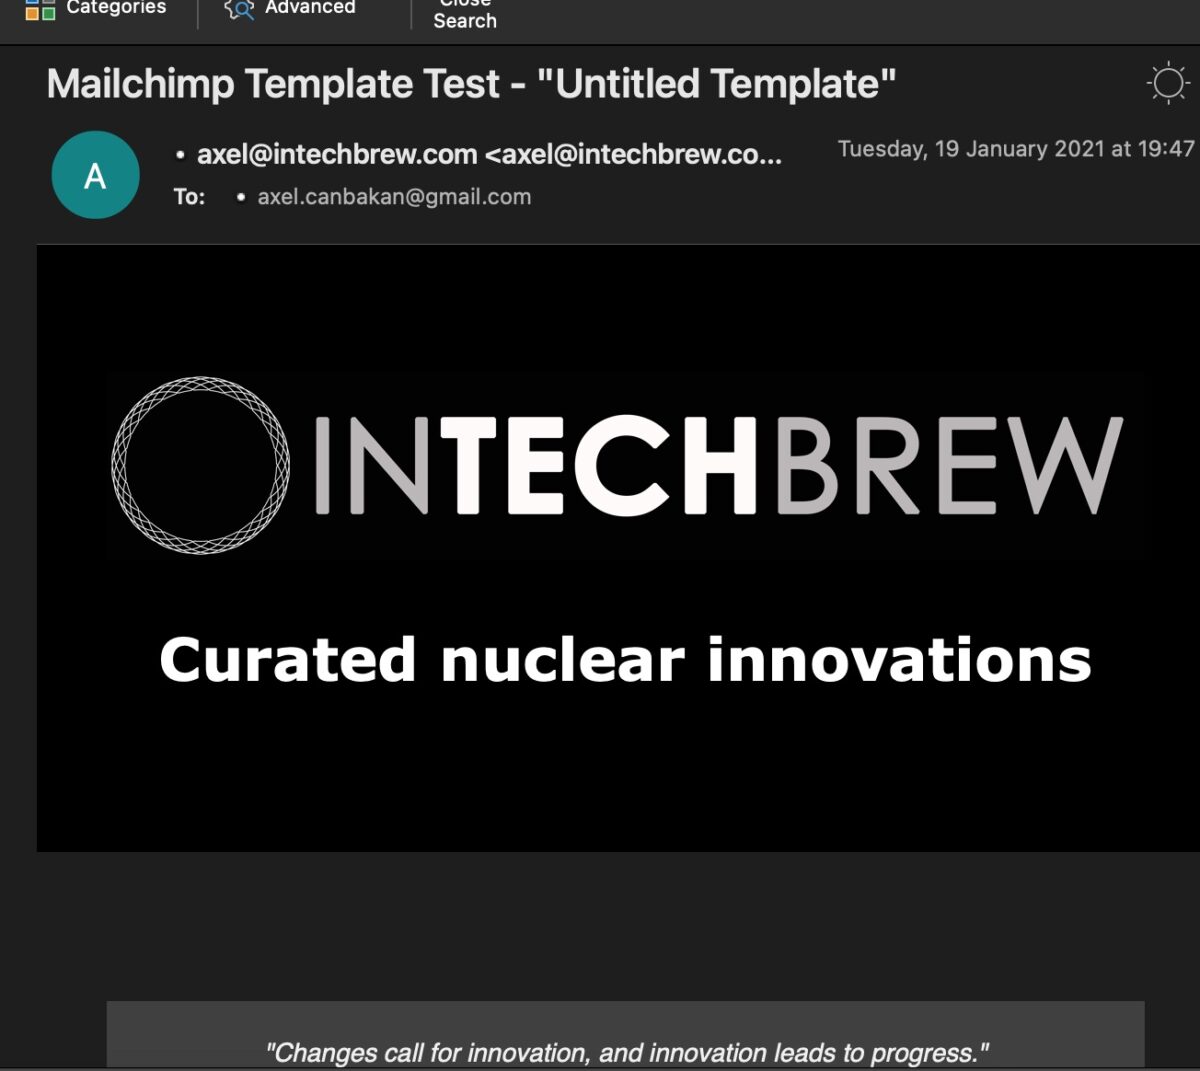 inTechBrew nuclear innovations